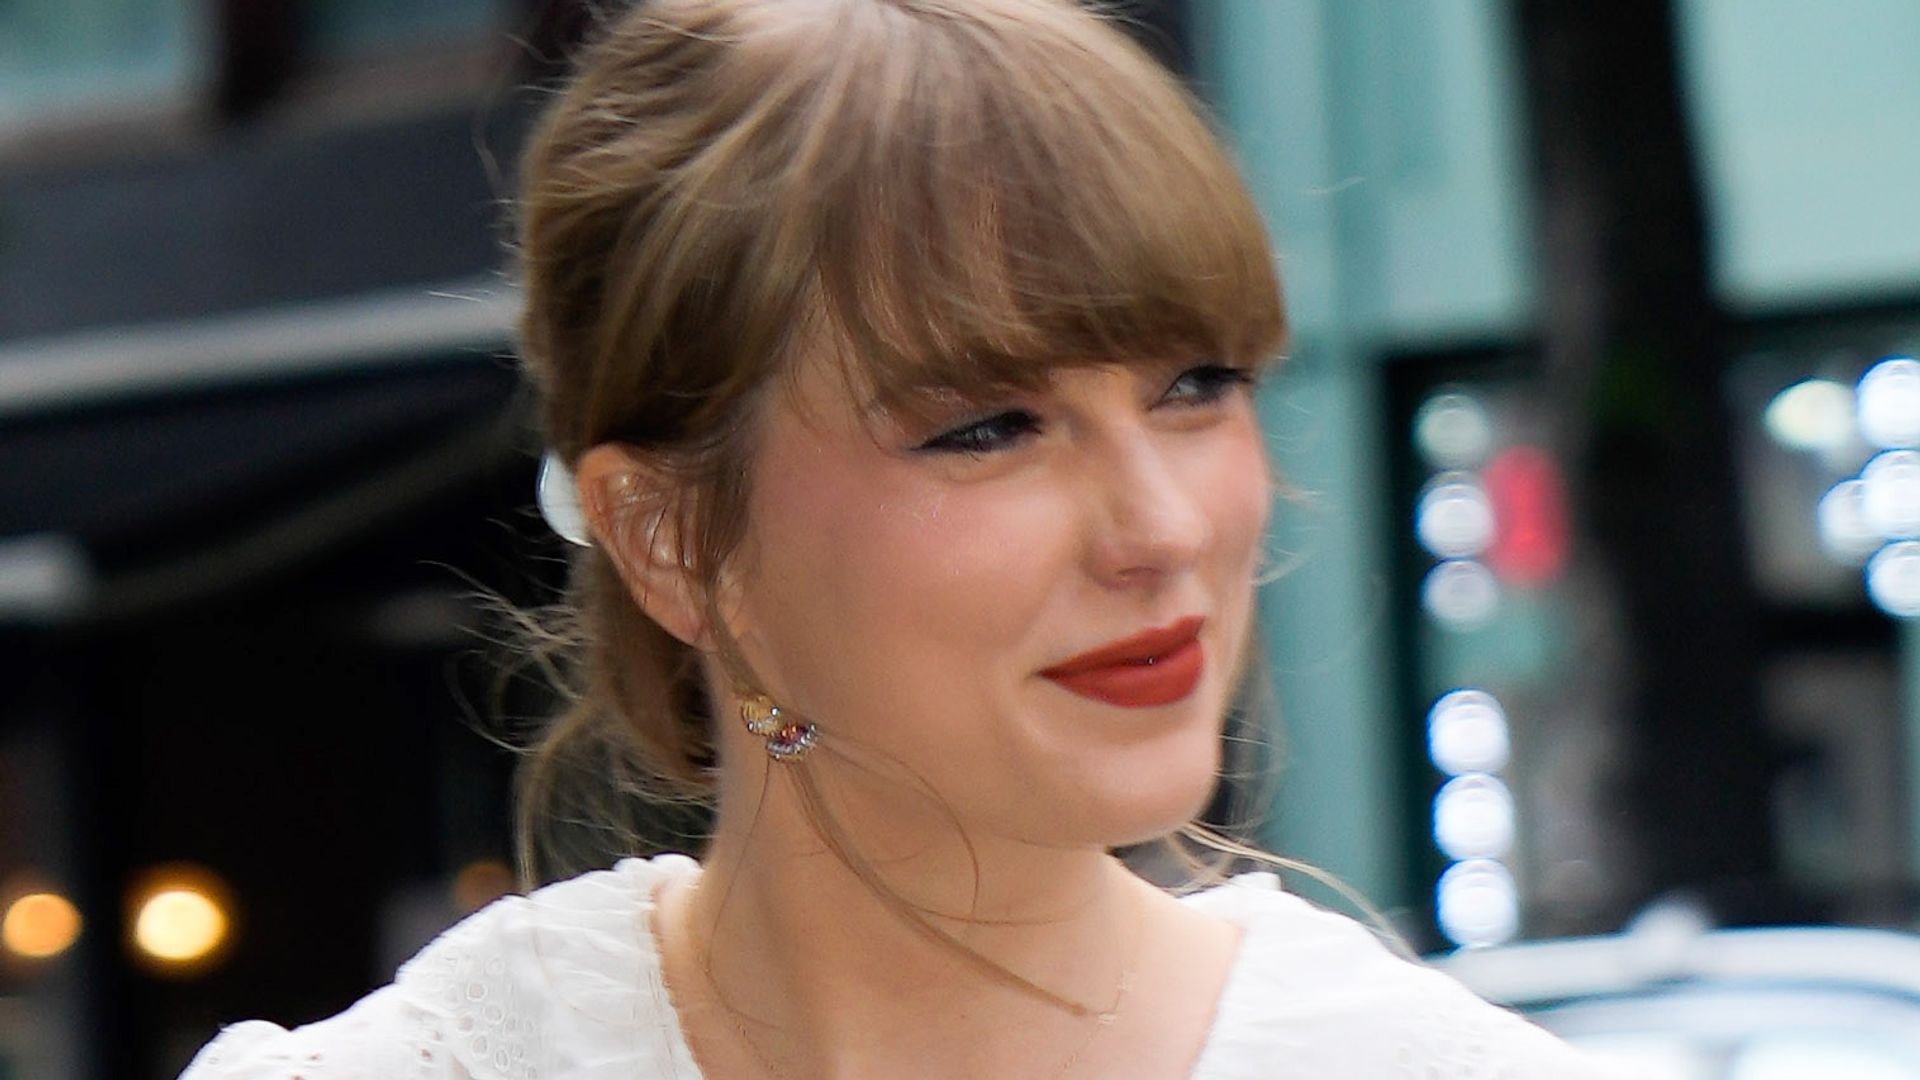  Taylor Swift is seen on June 27, 2023 in New York City. (Photo by Gotham/GC Images)